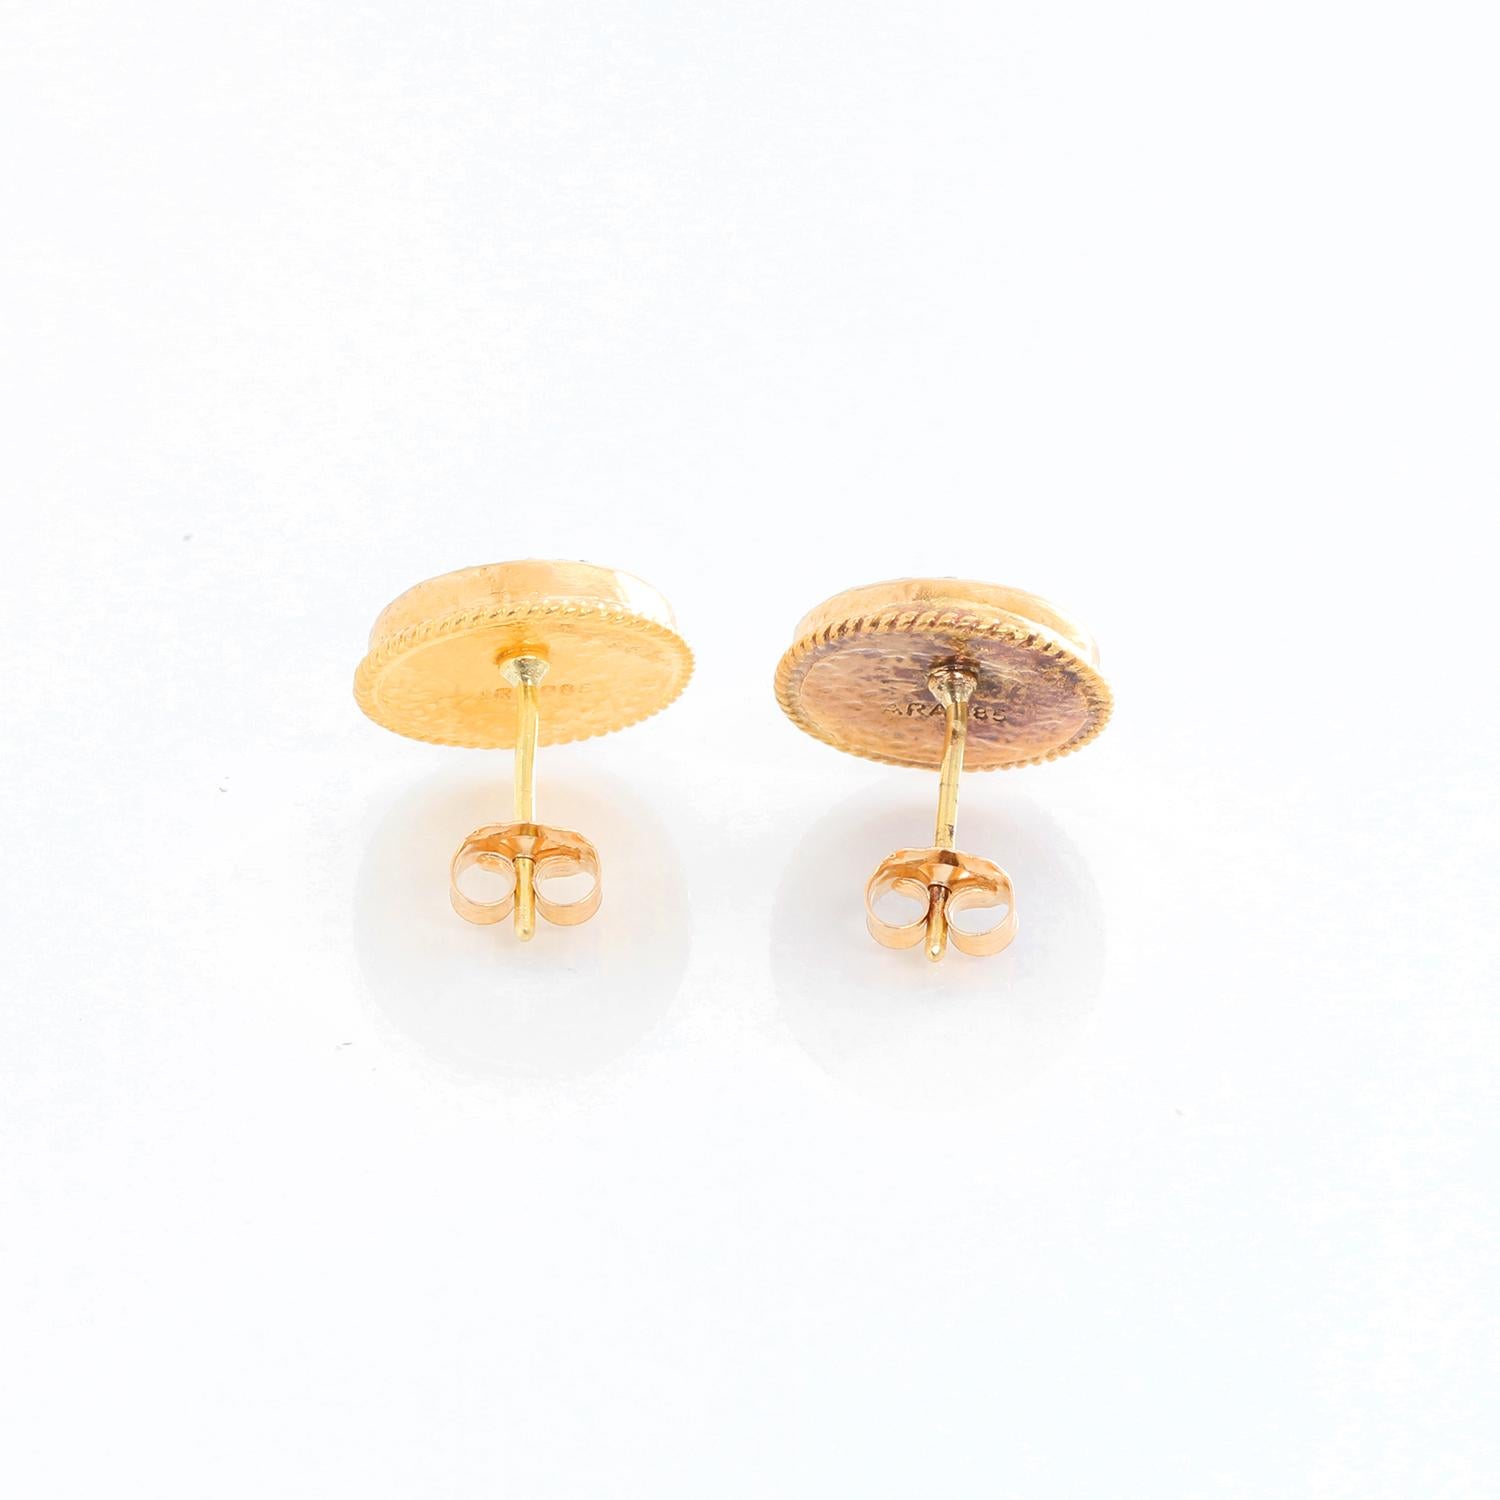 Ara 14K Yellow Gold and Sapphire Diamond Studs  - Round stud earring with white sapphire center stone and pave diamond halo in luxurious 24k yellow gold and oxidized silver. A perfect everyday stud that has a distinct designer look.  Pre-owned with